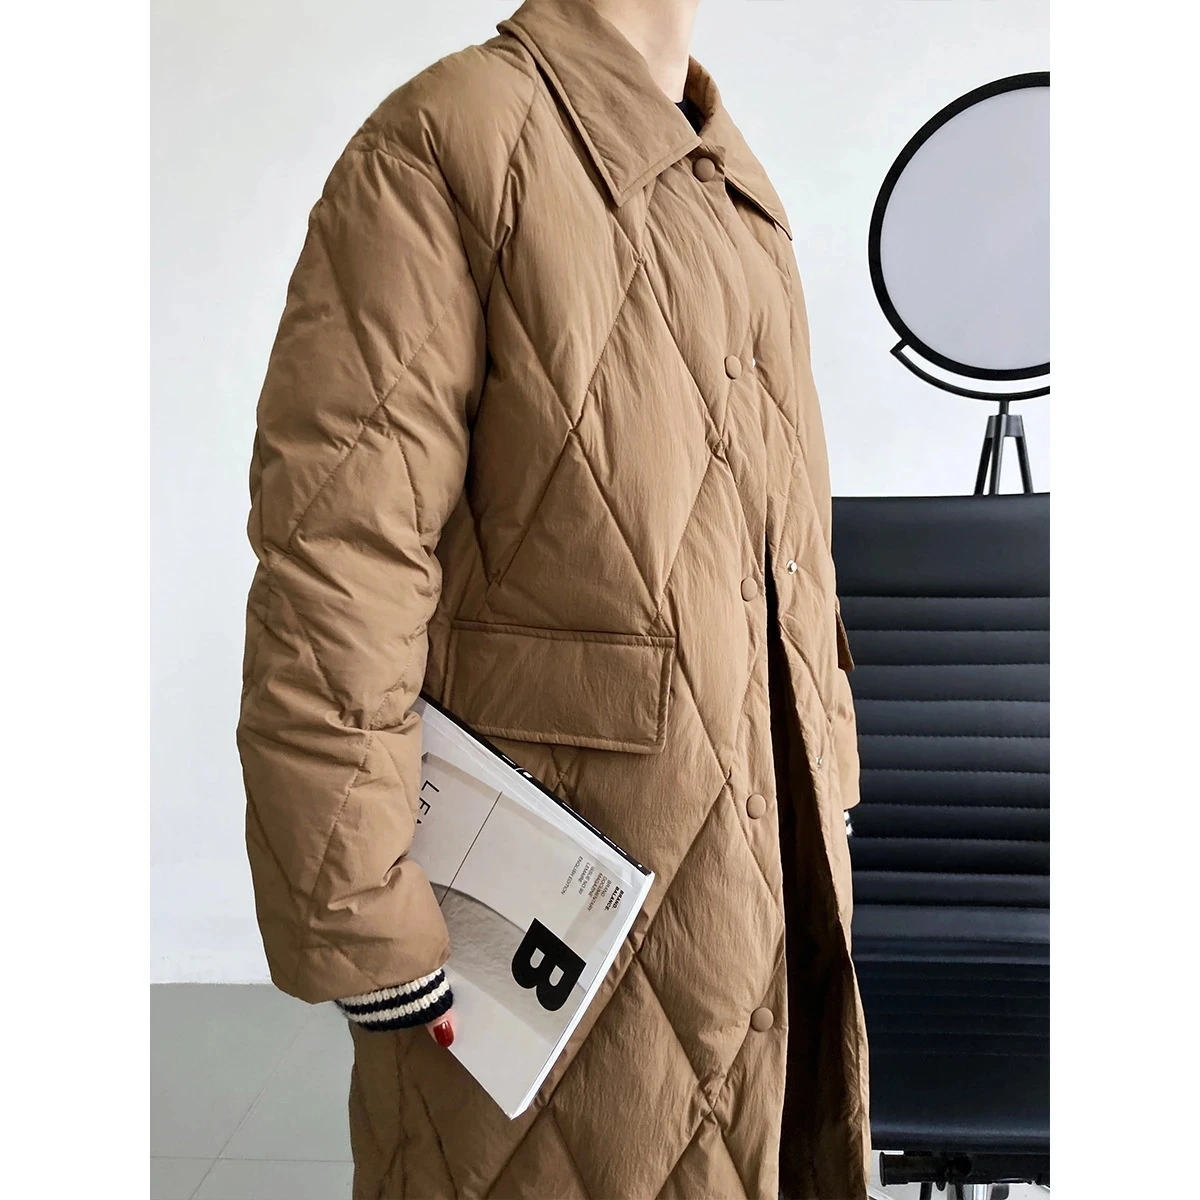 Winter Women's Argyle White Duck Down Coat Oversized Warm Quilted Coat Long Down Jacket Thick Coat for Women 2022